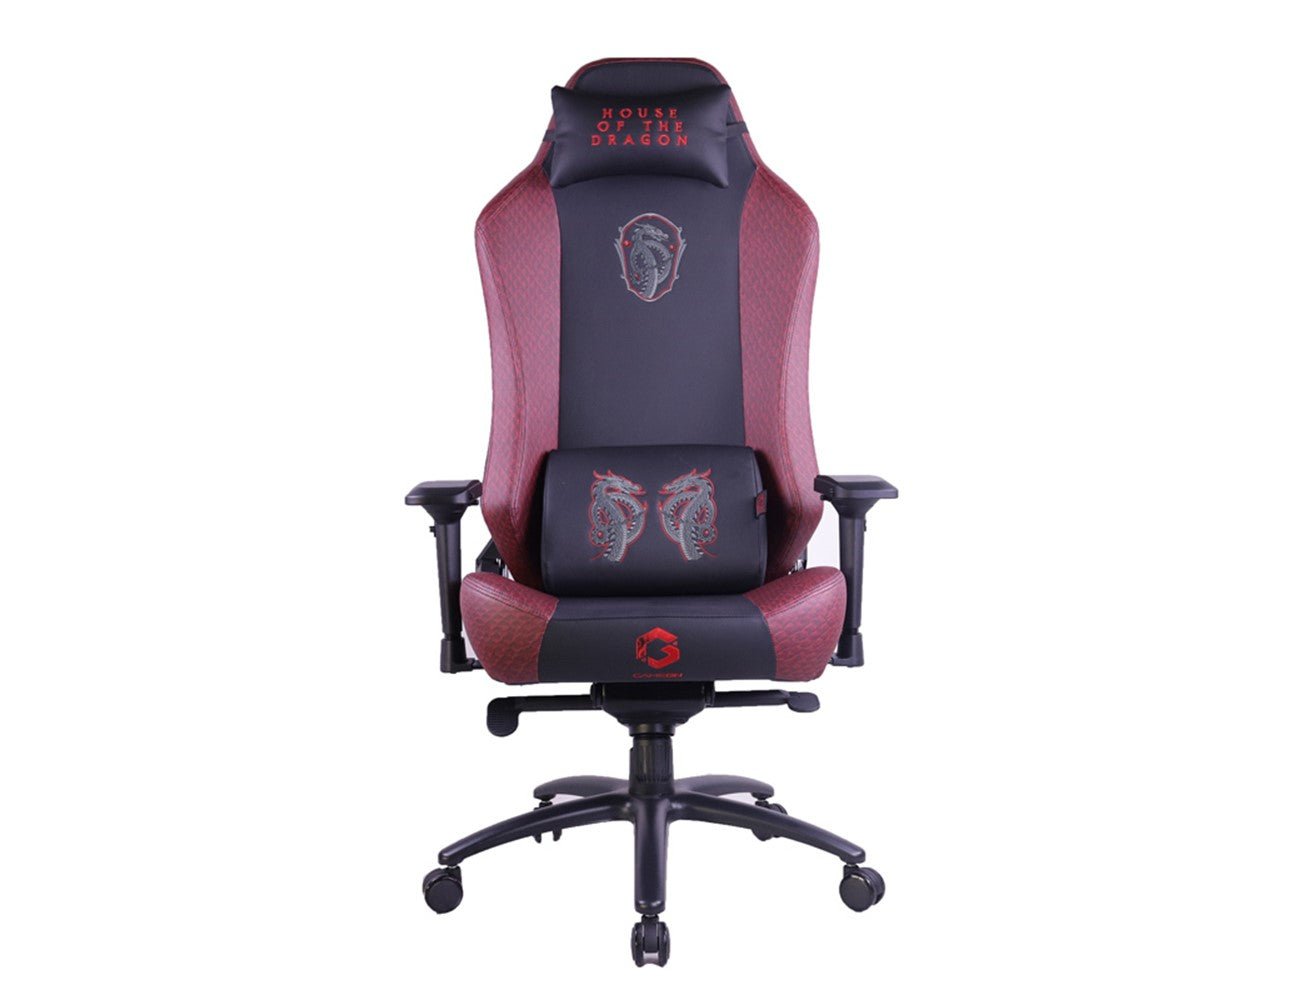 GameOn Licensed Gaming Chair With Adjustable 4D Armrest & Metal Base - House of The Dragons